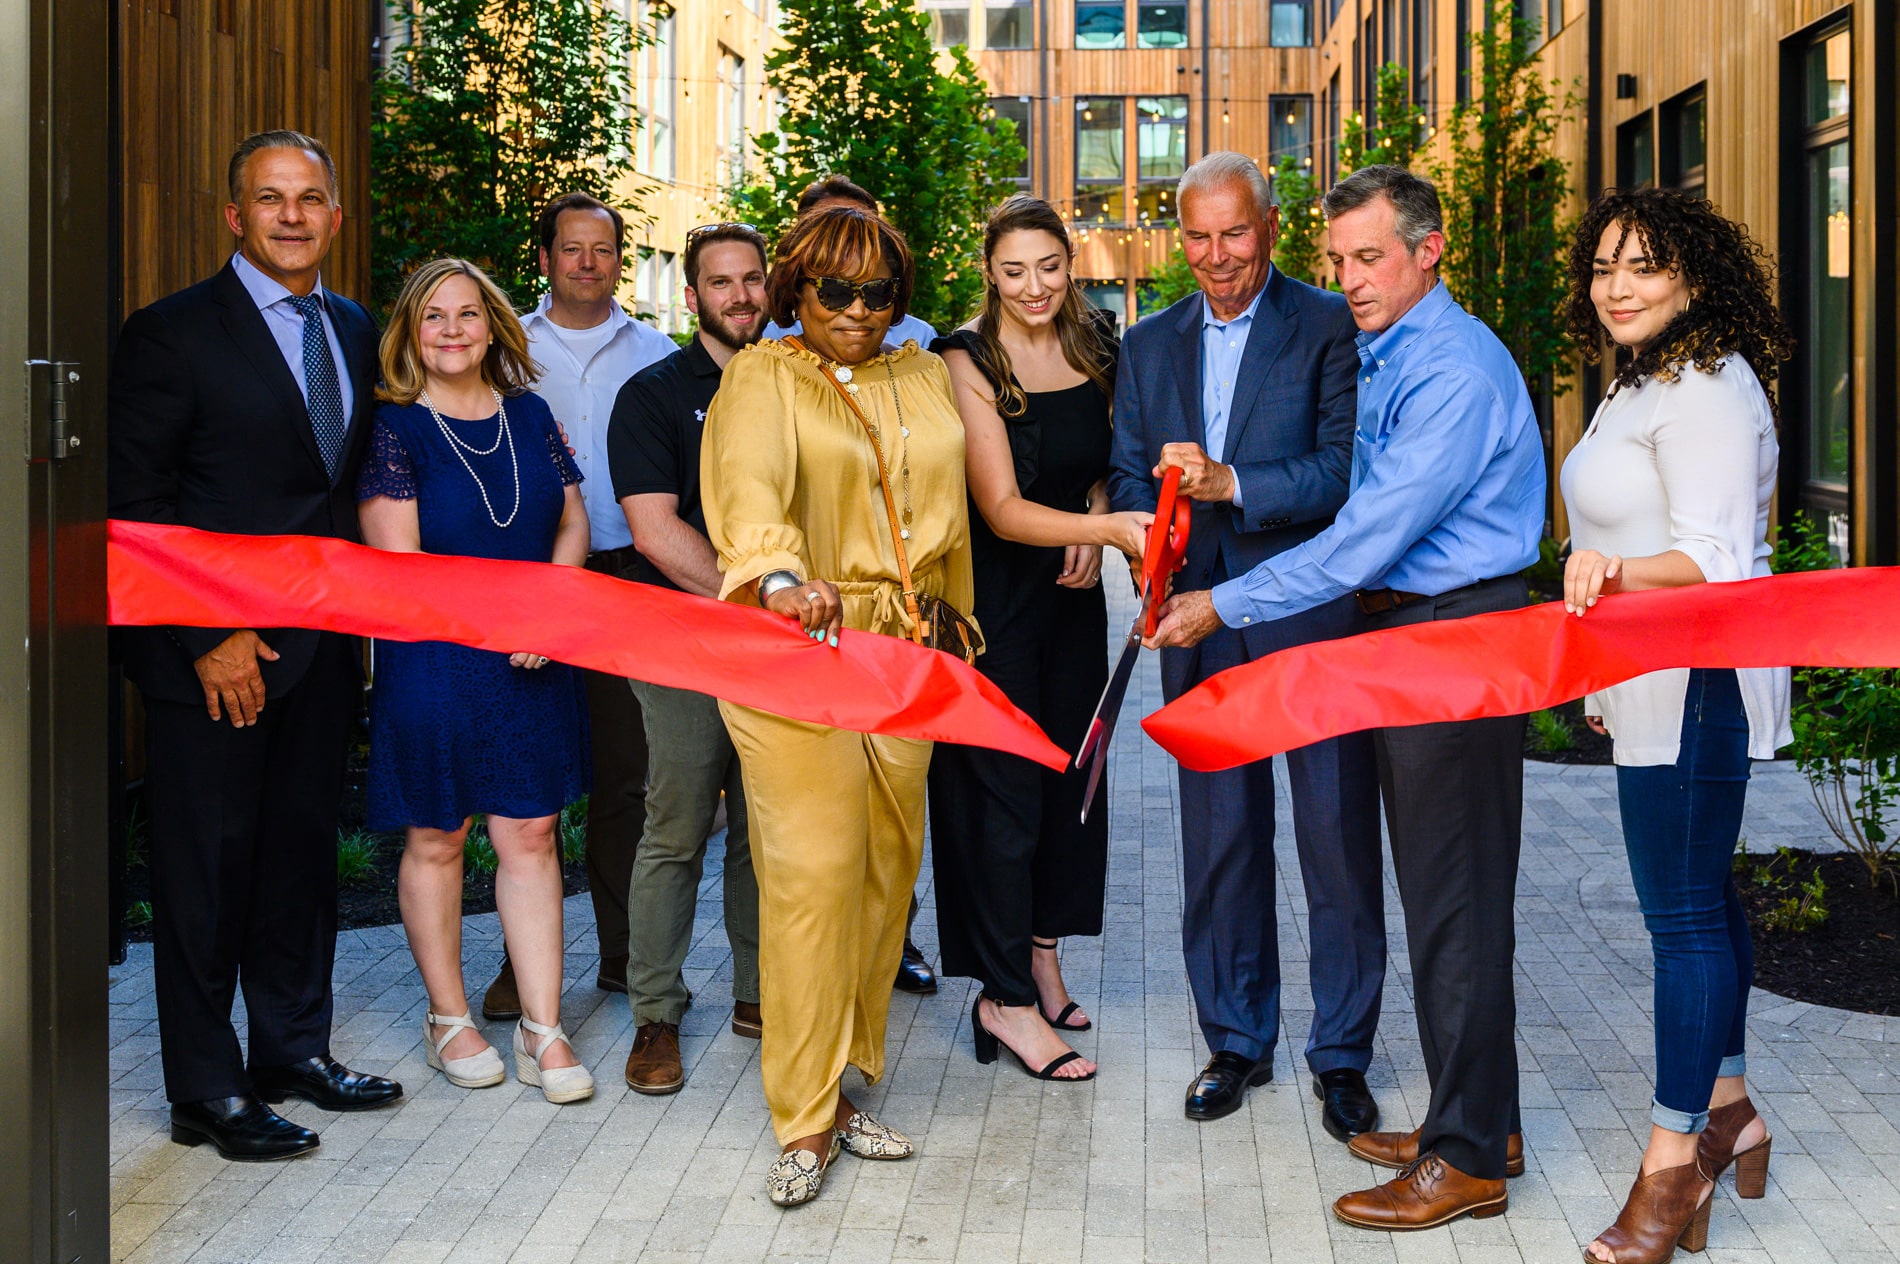 The Buccini/Pollin Group Celebrates Grand Opening of Wilmington’s Newest Residential Community at The Cooper